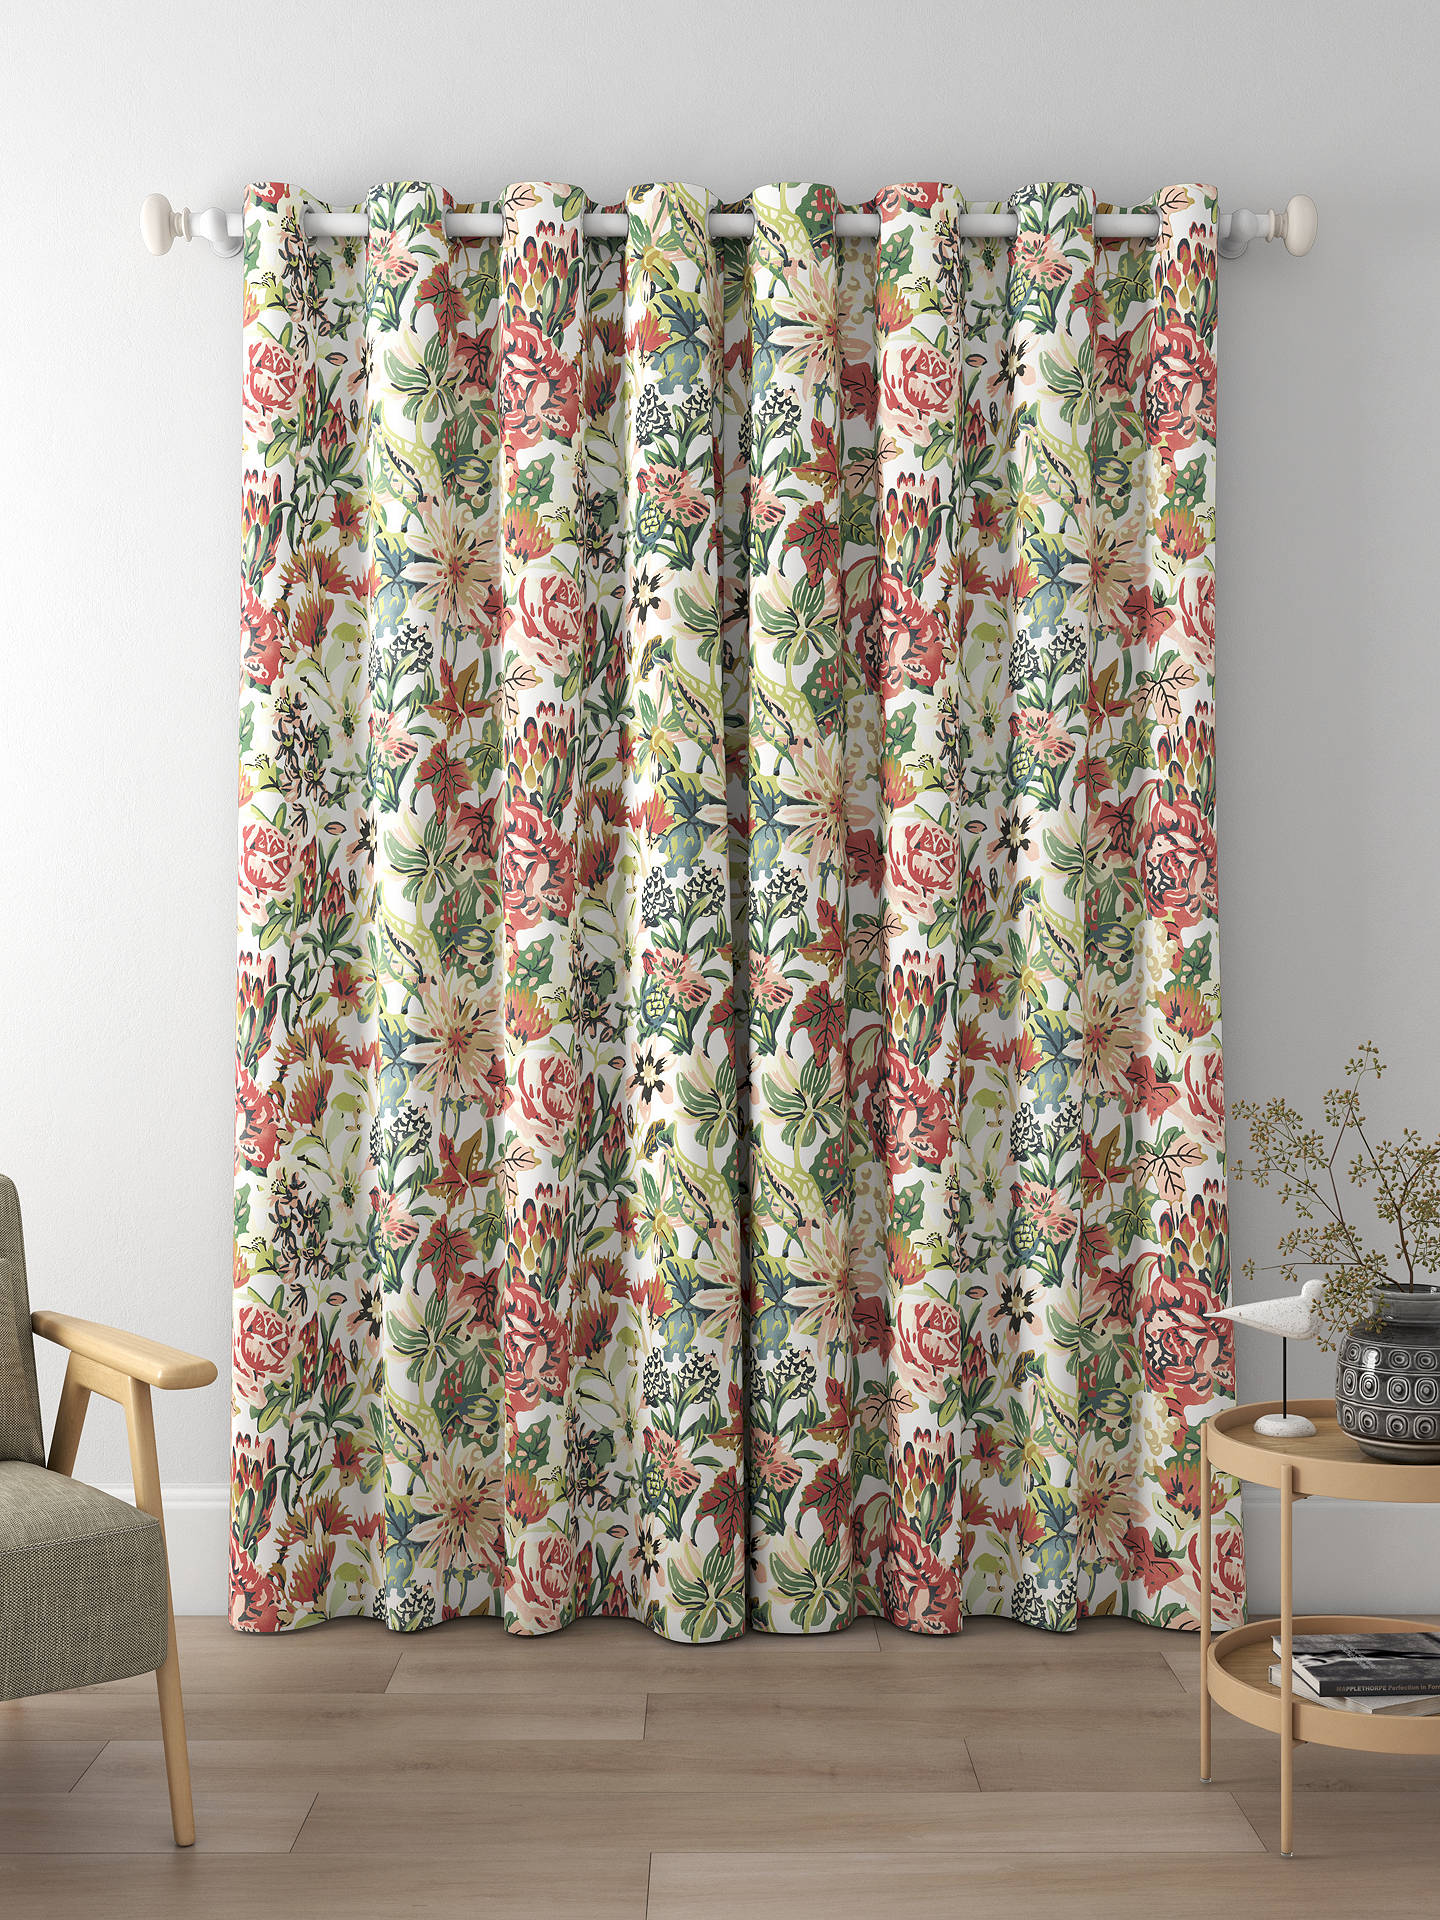 Harlequin Perennials Made to Measure Curtains, Grounded/Positano/Succulent